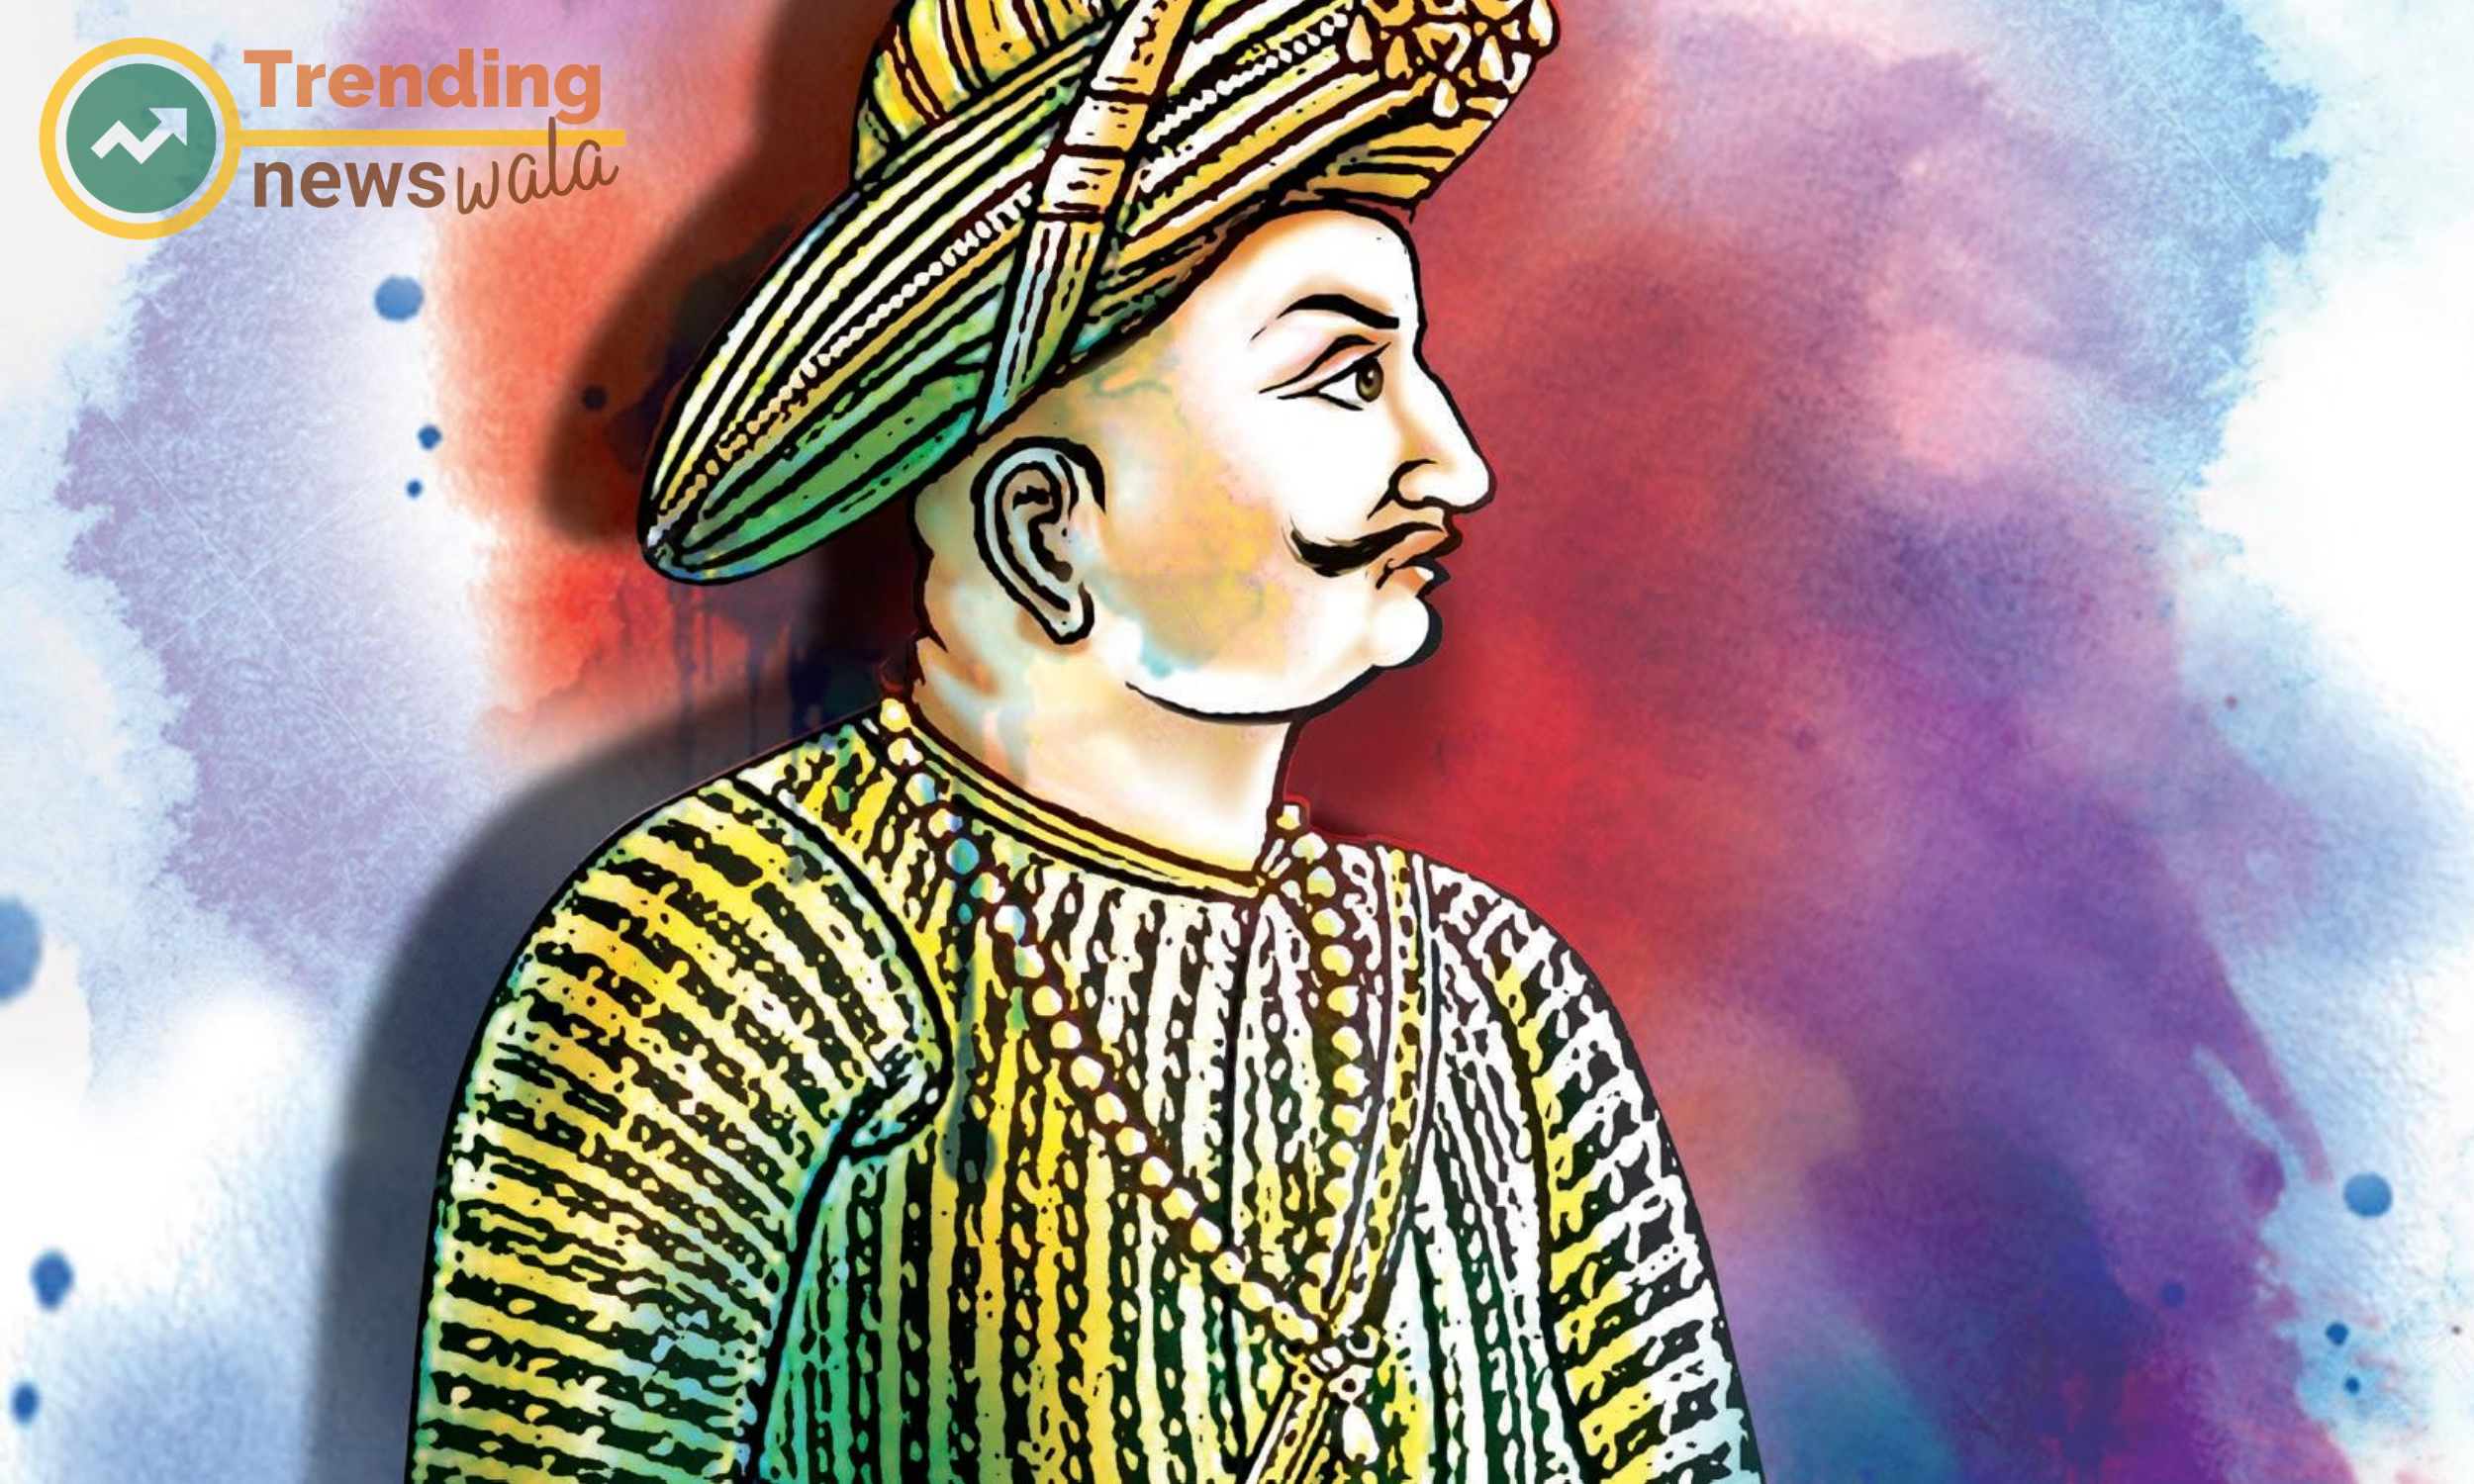 Tipu Sultan is his military campaigns against the British East India Company